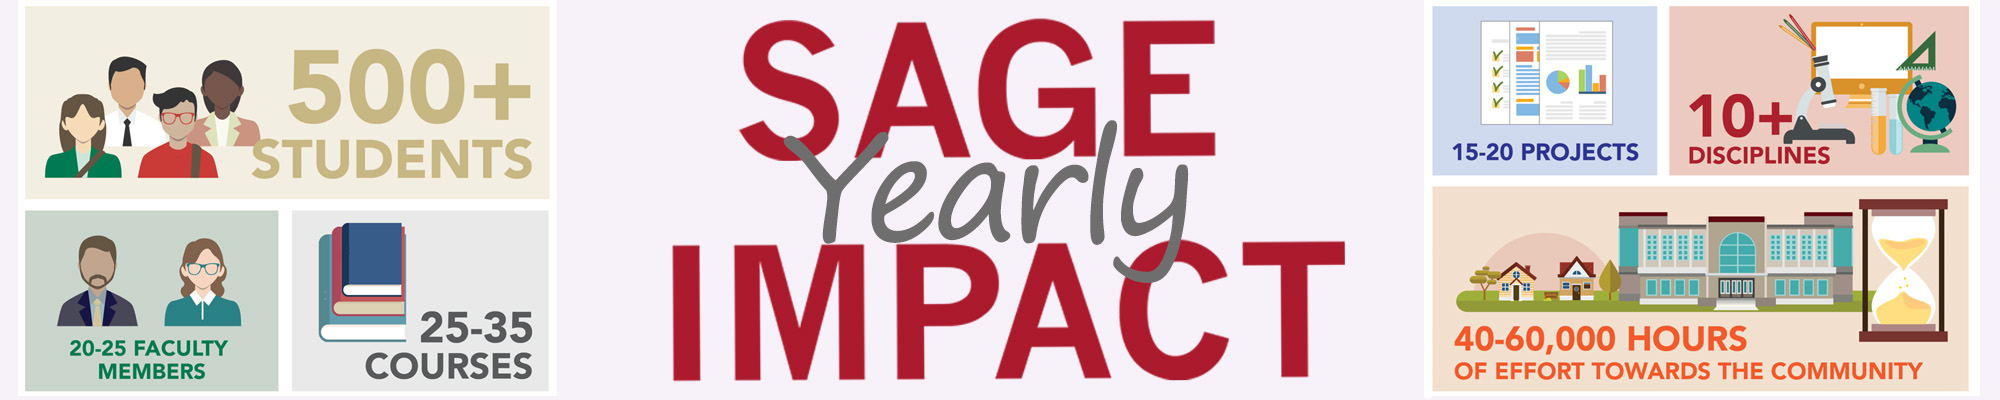 Sage Yearly Impact: 500+ students, 20-25 faculty, 25-35 courses, 15-20 projects 10+ disciplines, 40-60K Hours of effort towards community